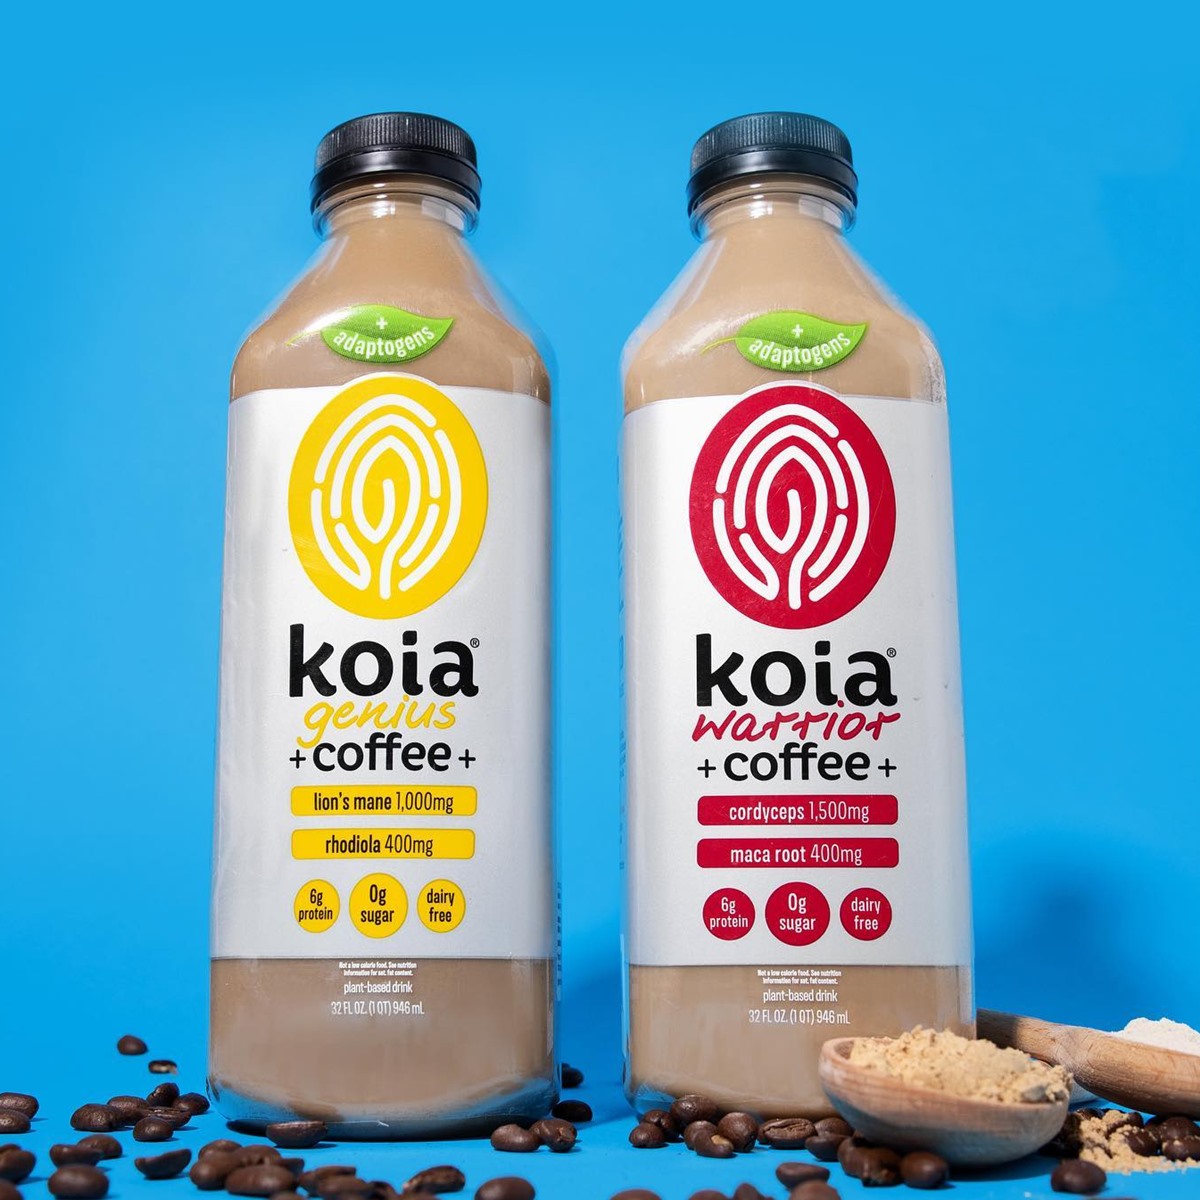 Koia Coffee Drinks Reviews and Info - Adaptogen line with herbs, MCT oil, and plant-based protein - all dairy-free, gluten-free, and allergy-friendly